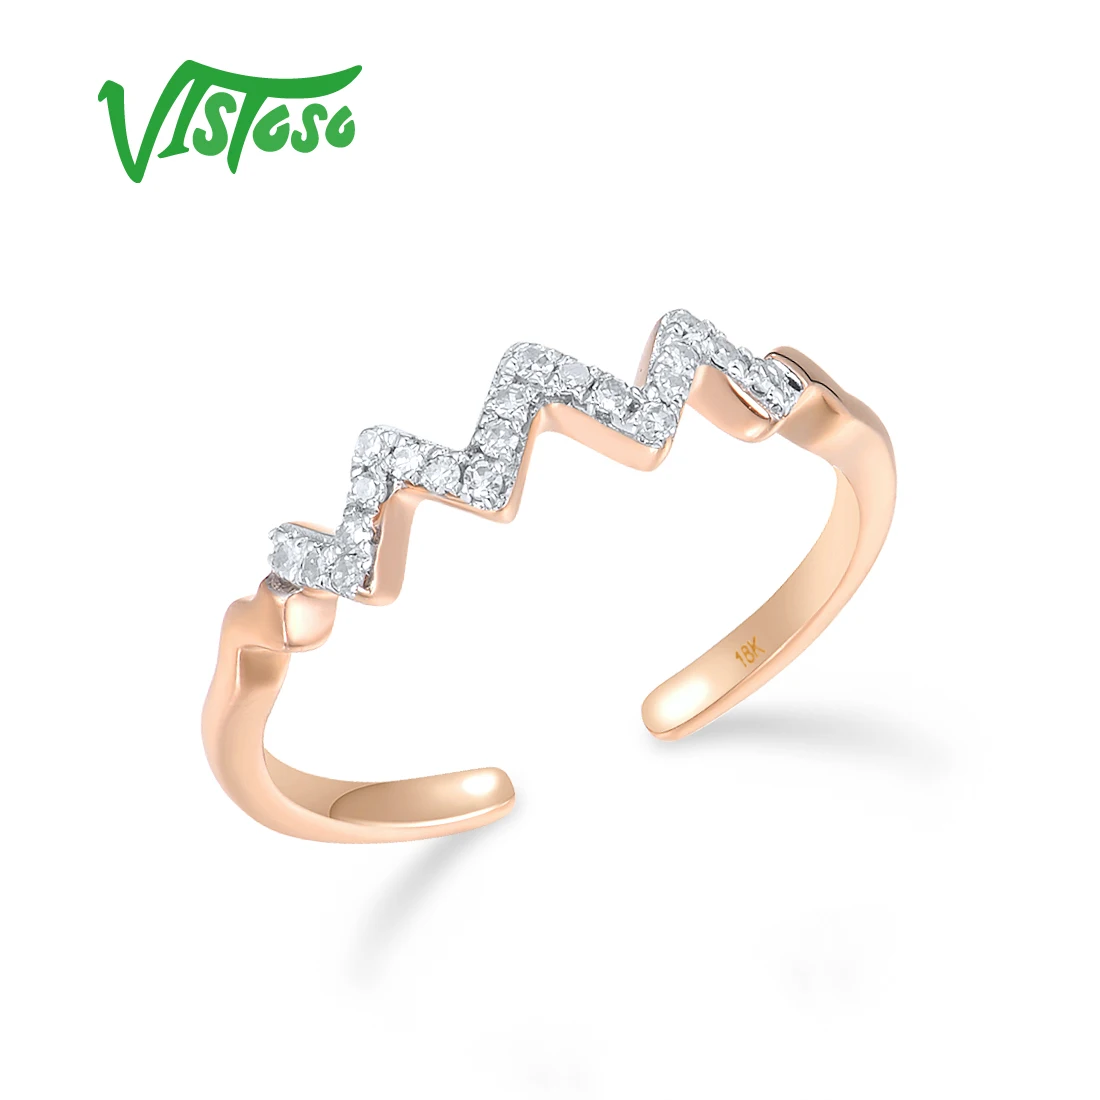 VISTOSO Genuine 18K 750 Rose Gold Pinky Ring For Women Sparkling Diamond Open Ring Adjustable Delicate Dainty Edgy Fine Jewelry